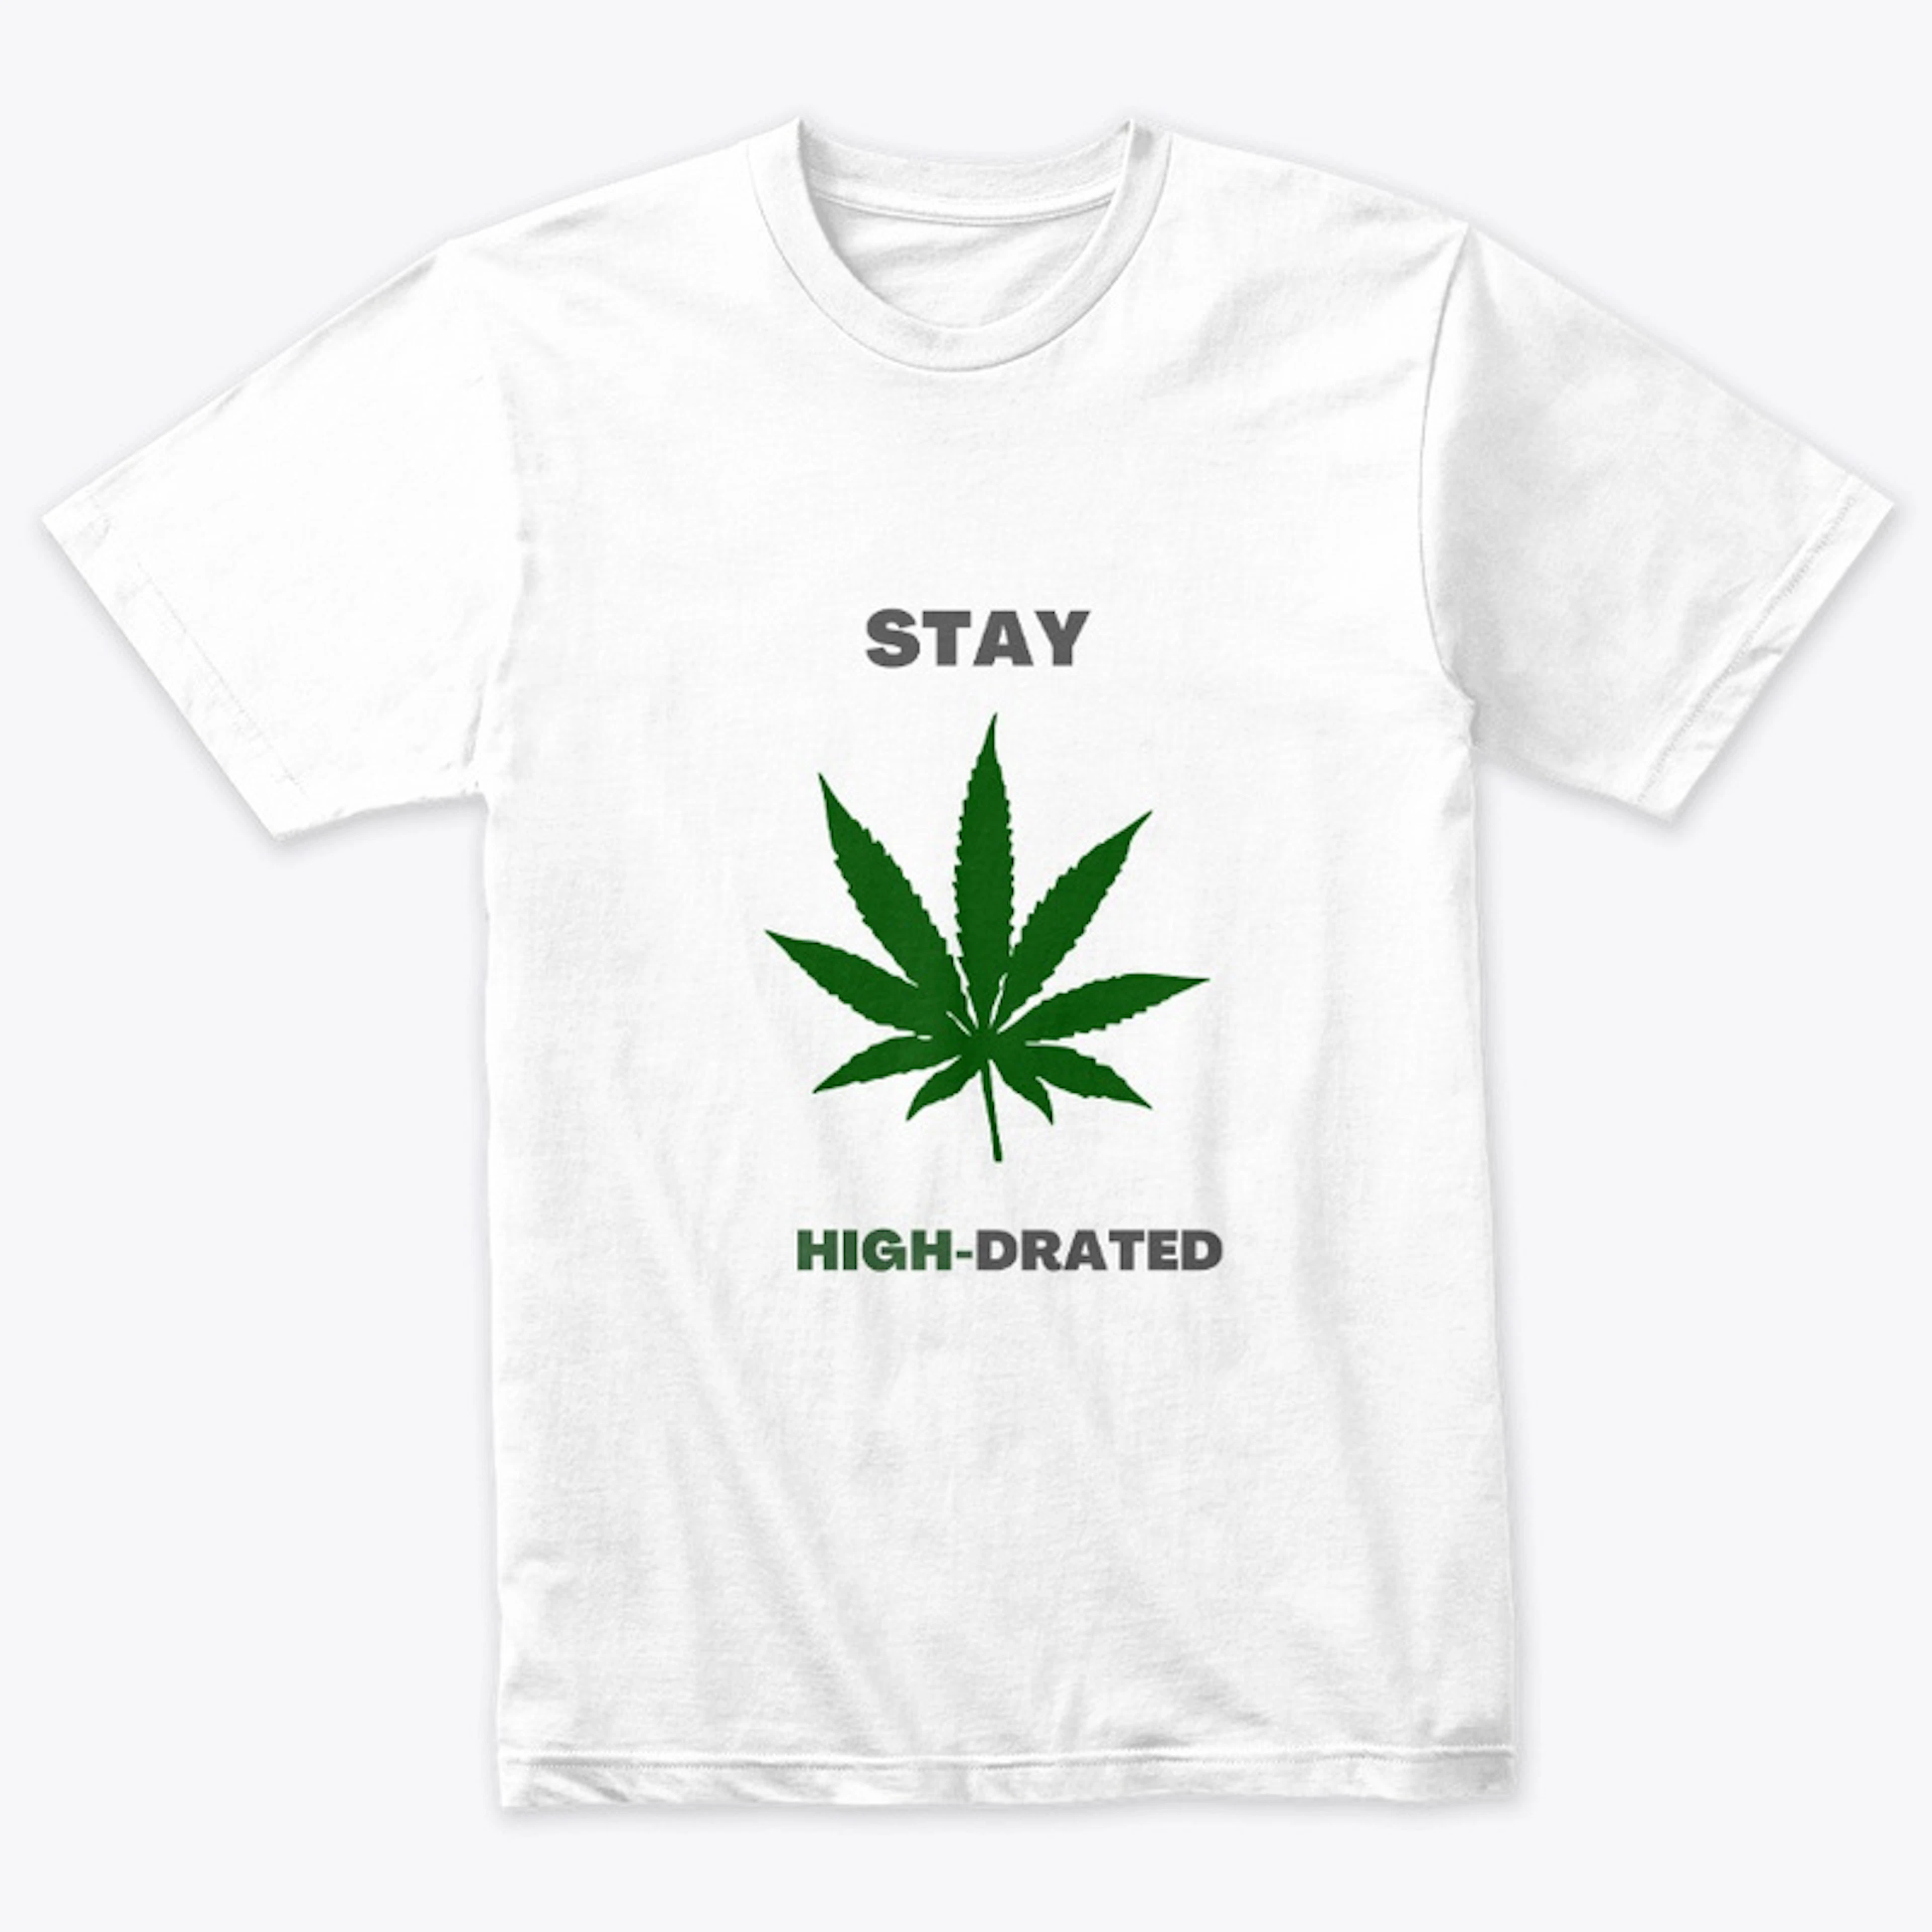 Stay High-drated